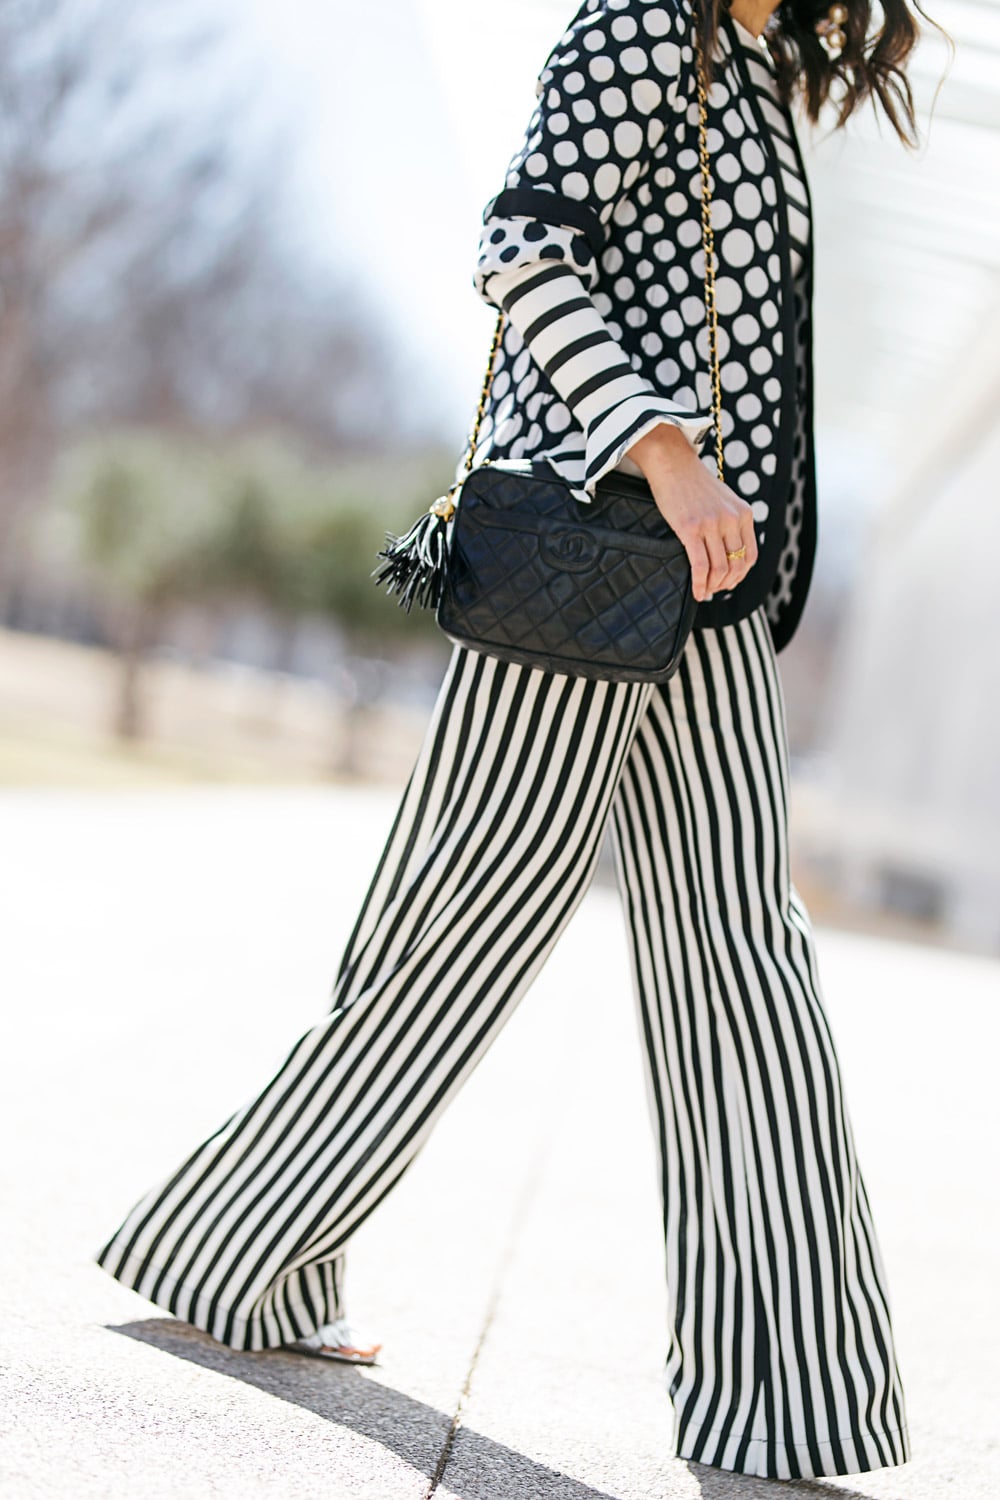 style of sam in polka dot jacket and reformation striped pants